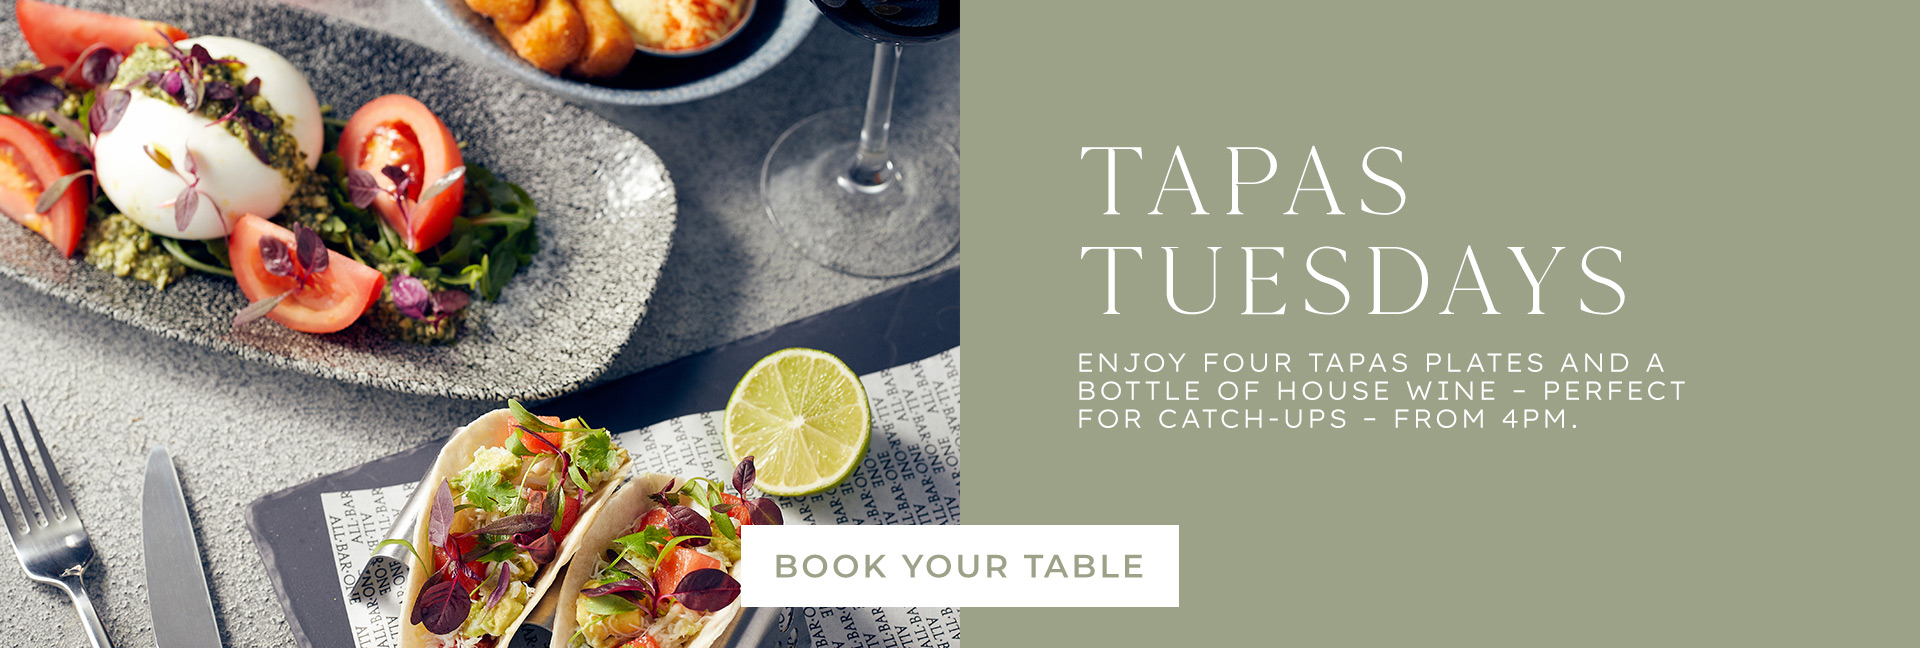 Tapas Tuesday at All Bar One Norwich - Book now